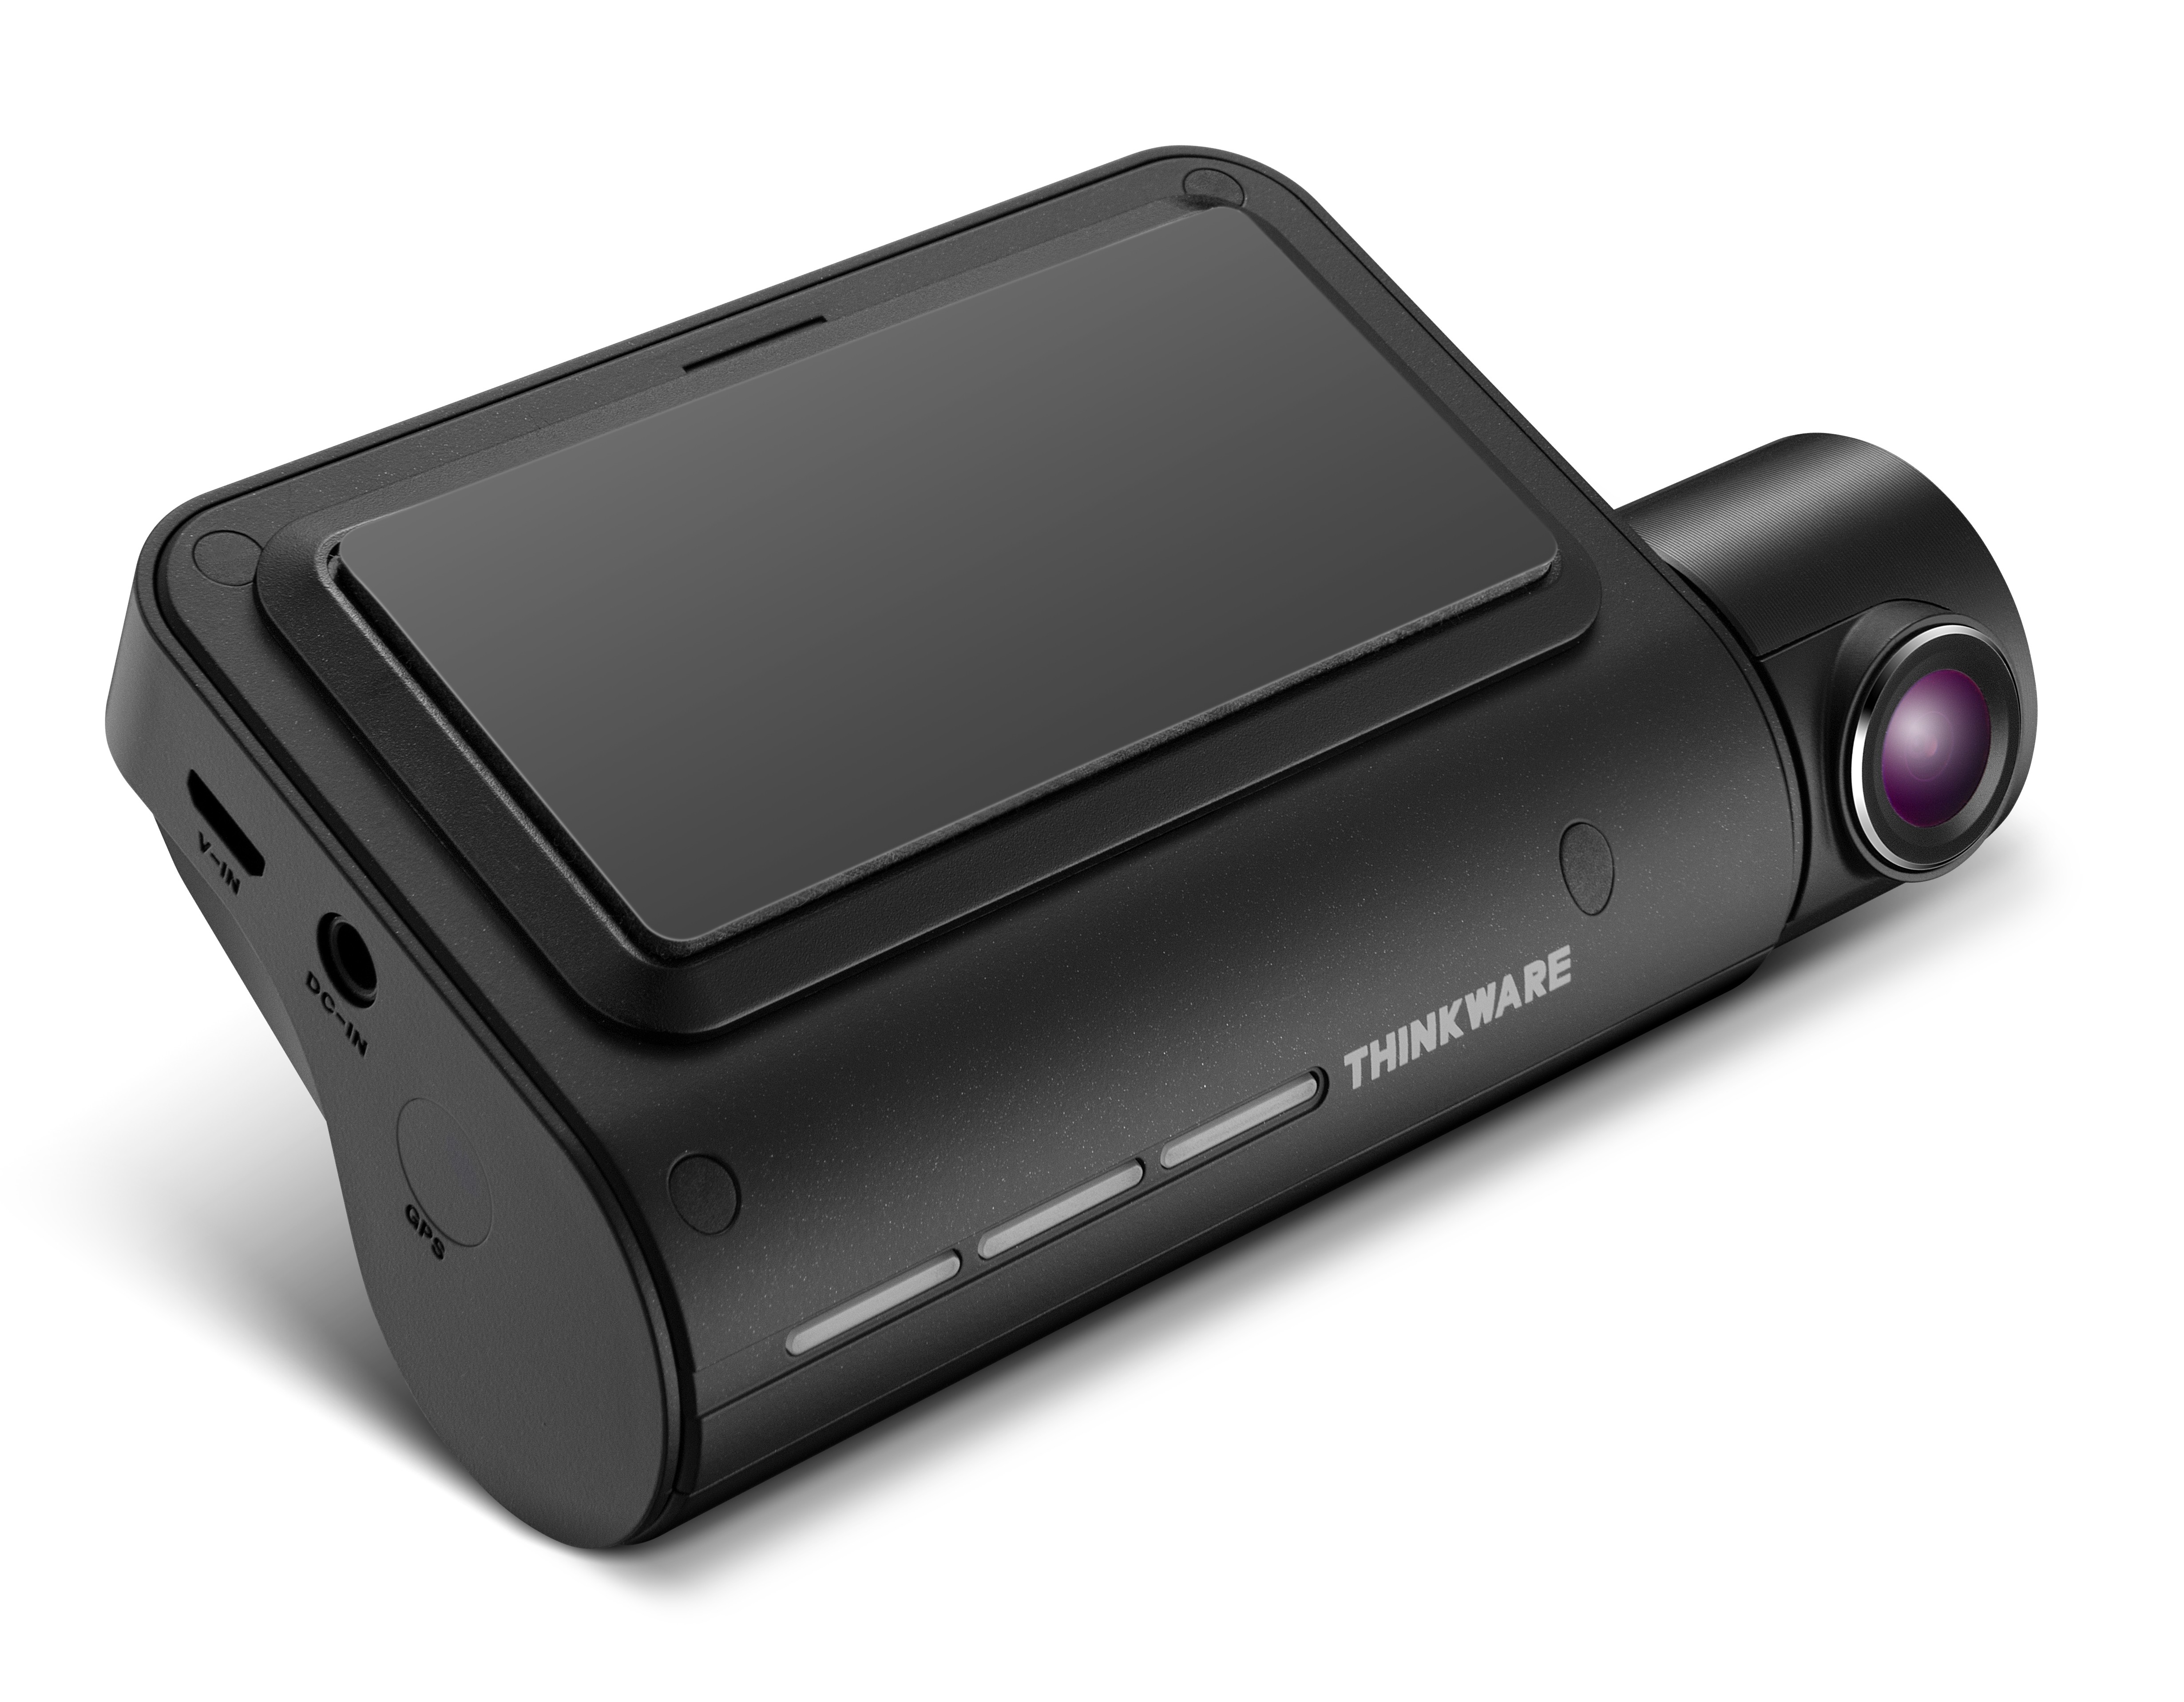 1080P HD 2-Channel Dash Cam with Sony Exmor STARVIS Sensor